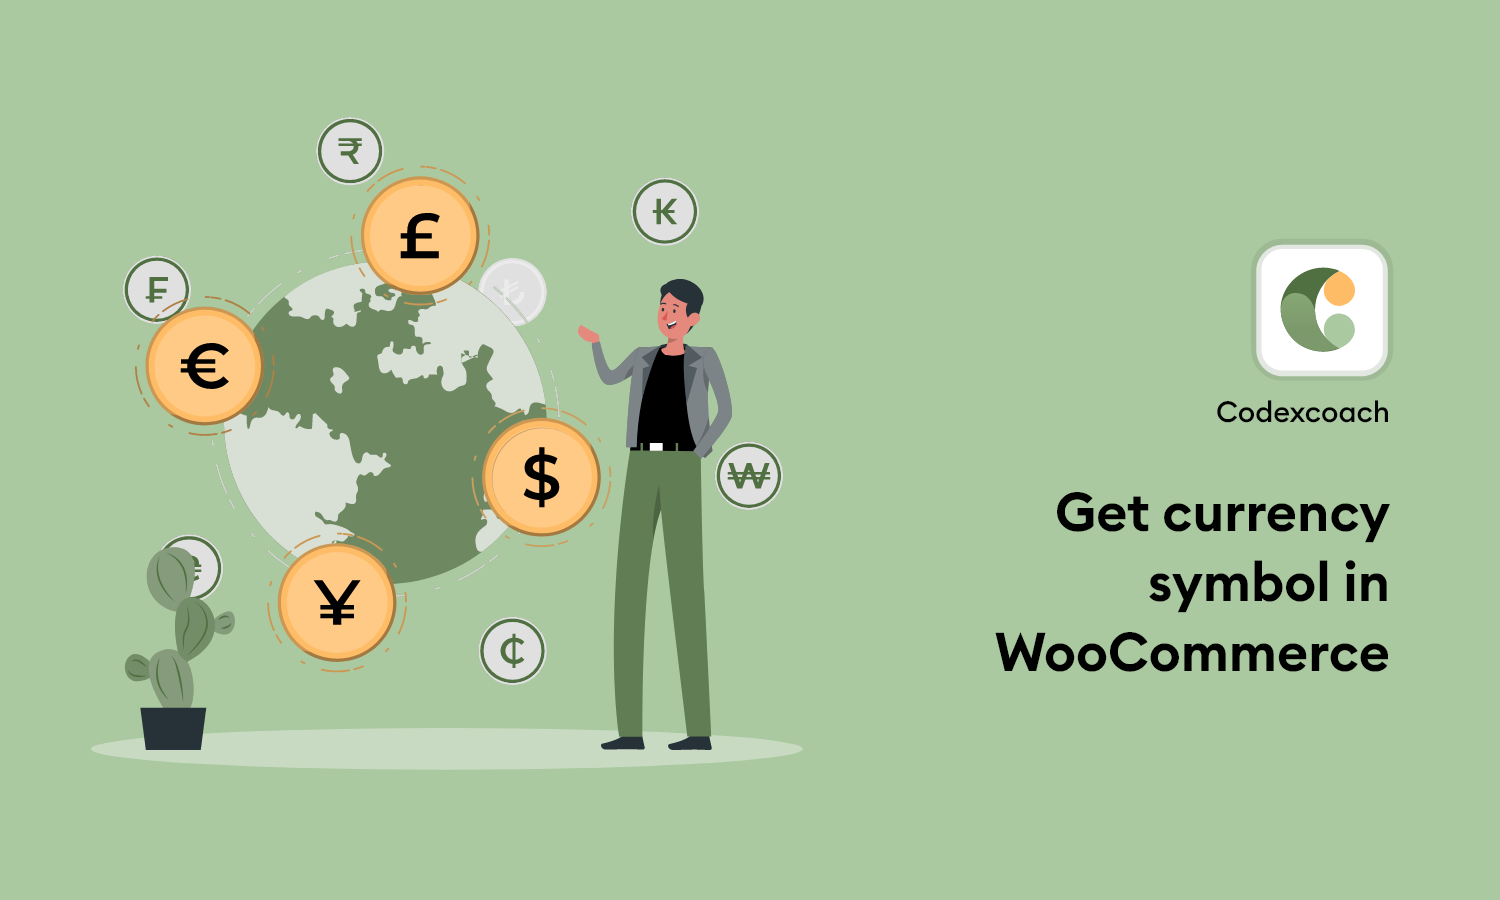 Get currency symbol in WooCommerce